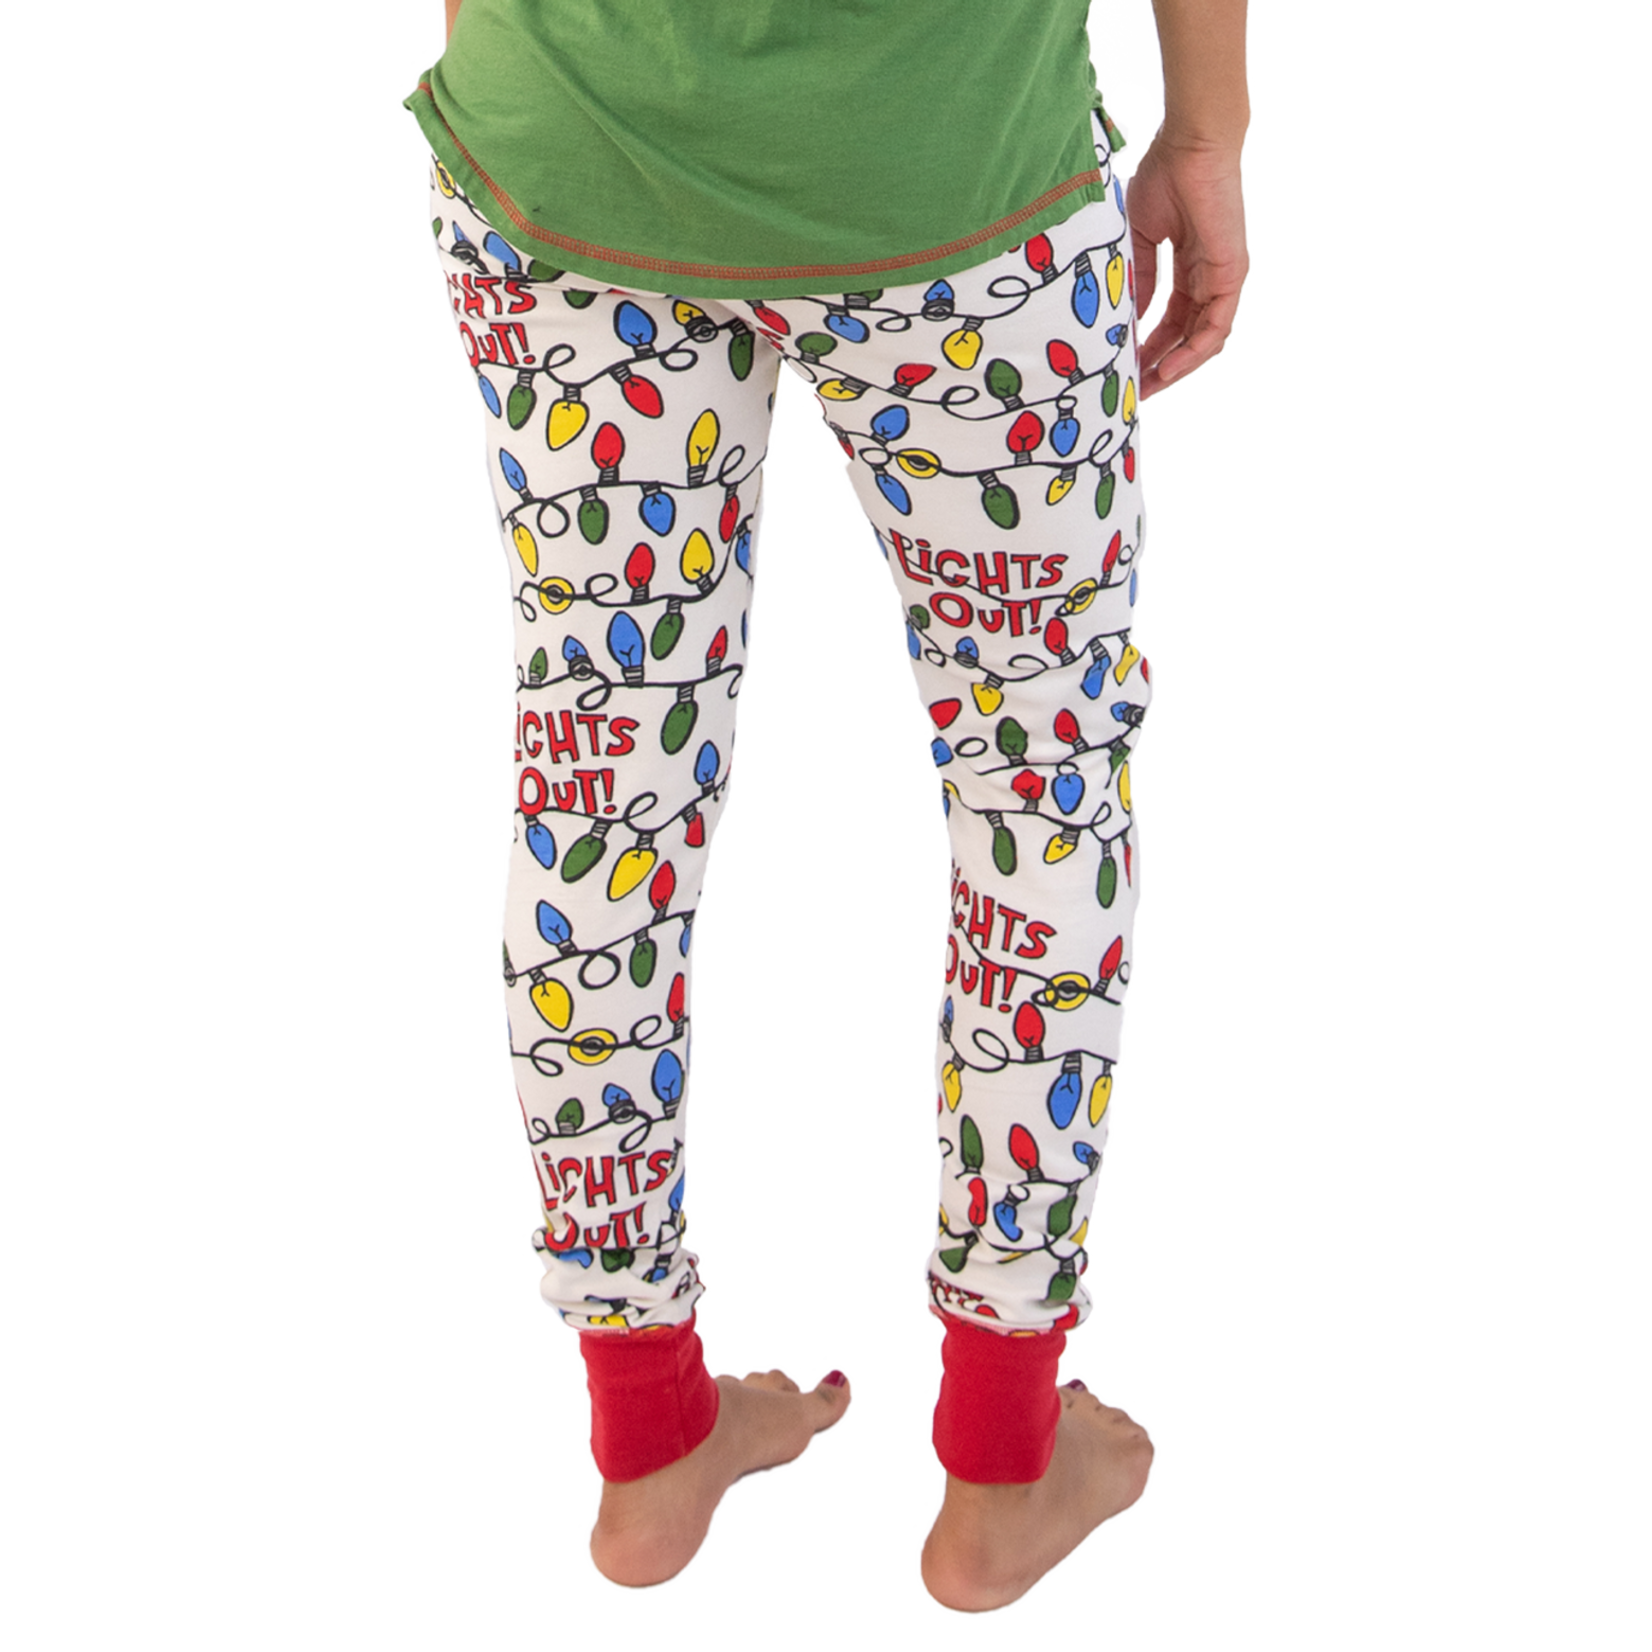 Lazy One Lights Out! Women's Reindeer Legging